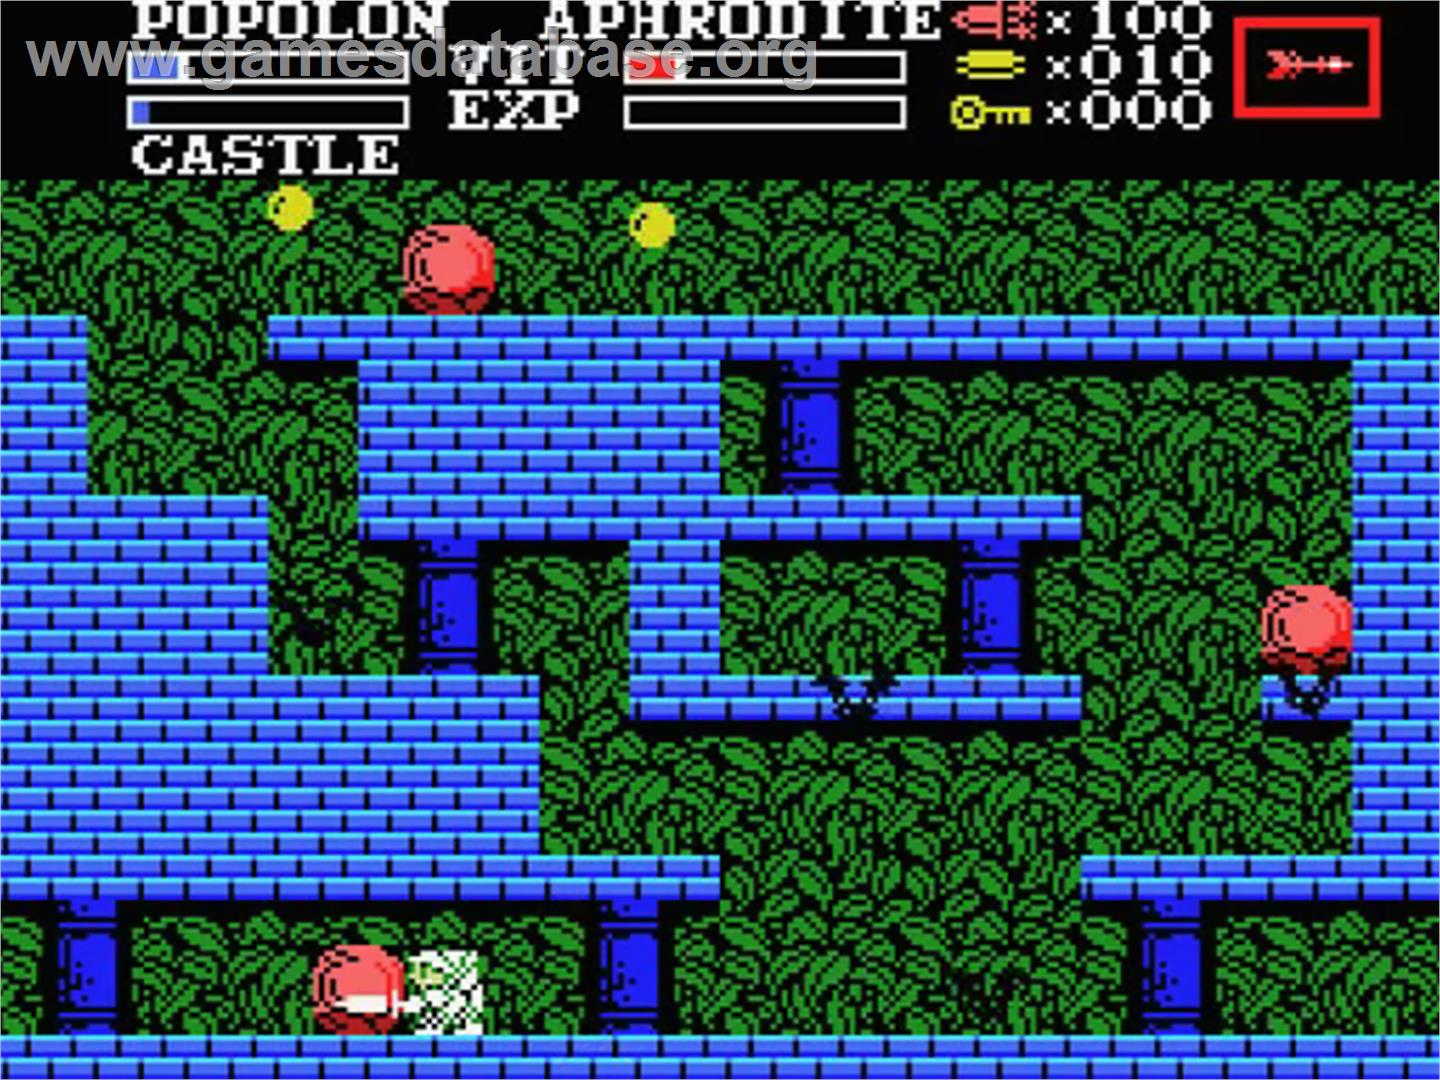 Knightmare 2: The Maze of Galious - MSX - Artwork - In Game